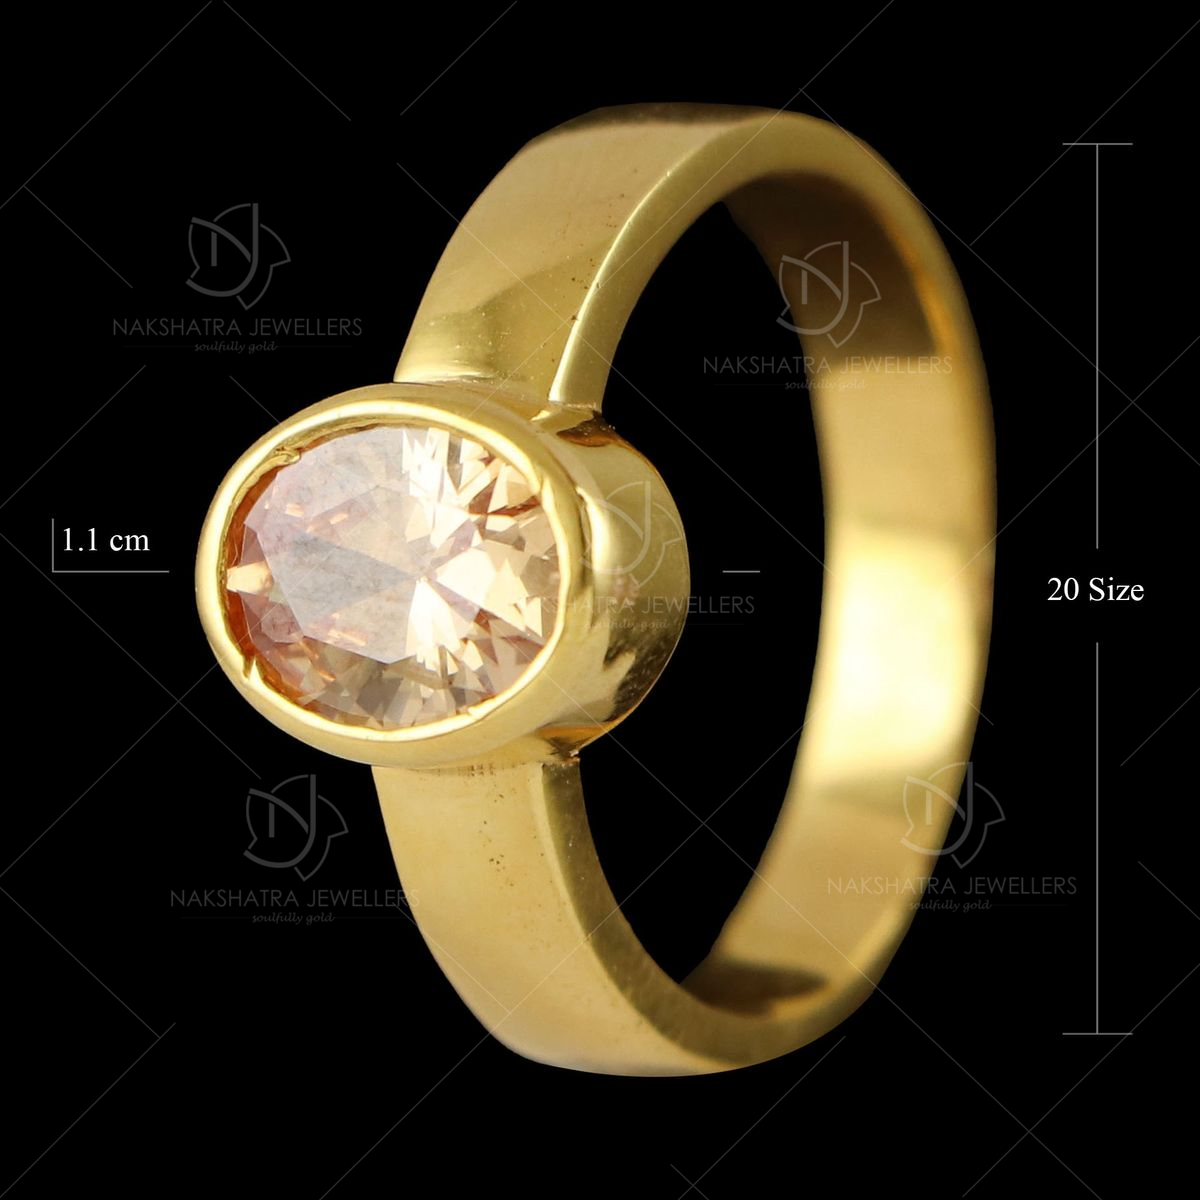 Buy quality 916 gold fancy green stone ladies ring in Ahmedabad